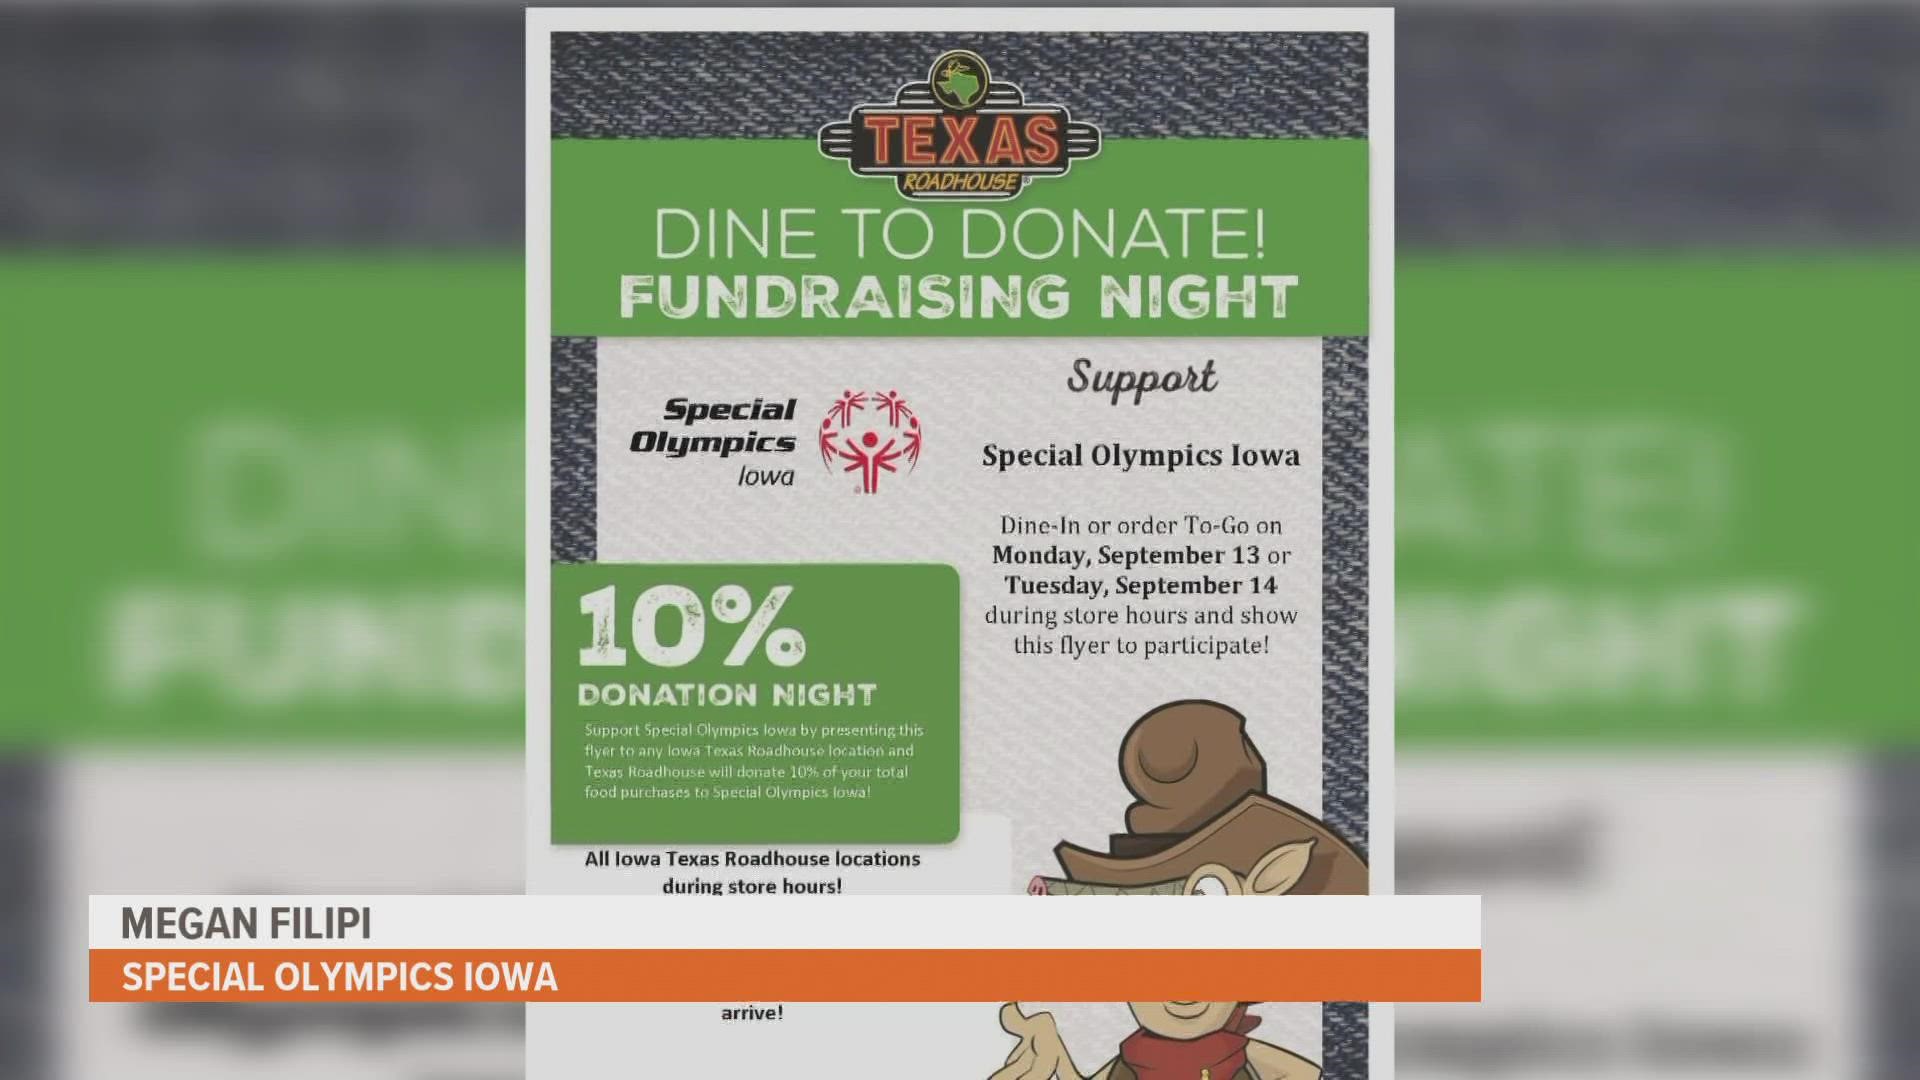 Dine-In or order To-Go from any Texas Roadhouse in Iowa to donate 10% and support Special Olympics Iowa